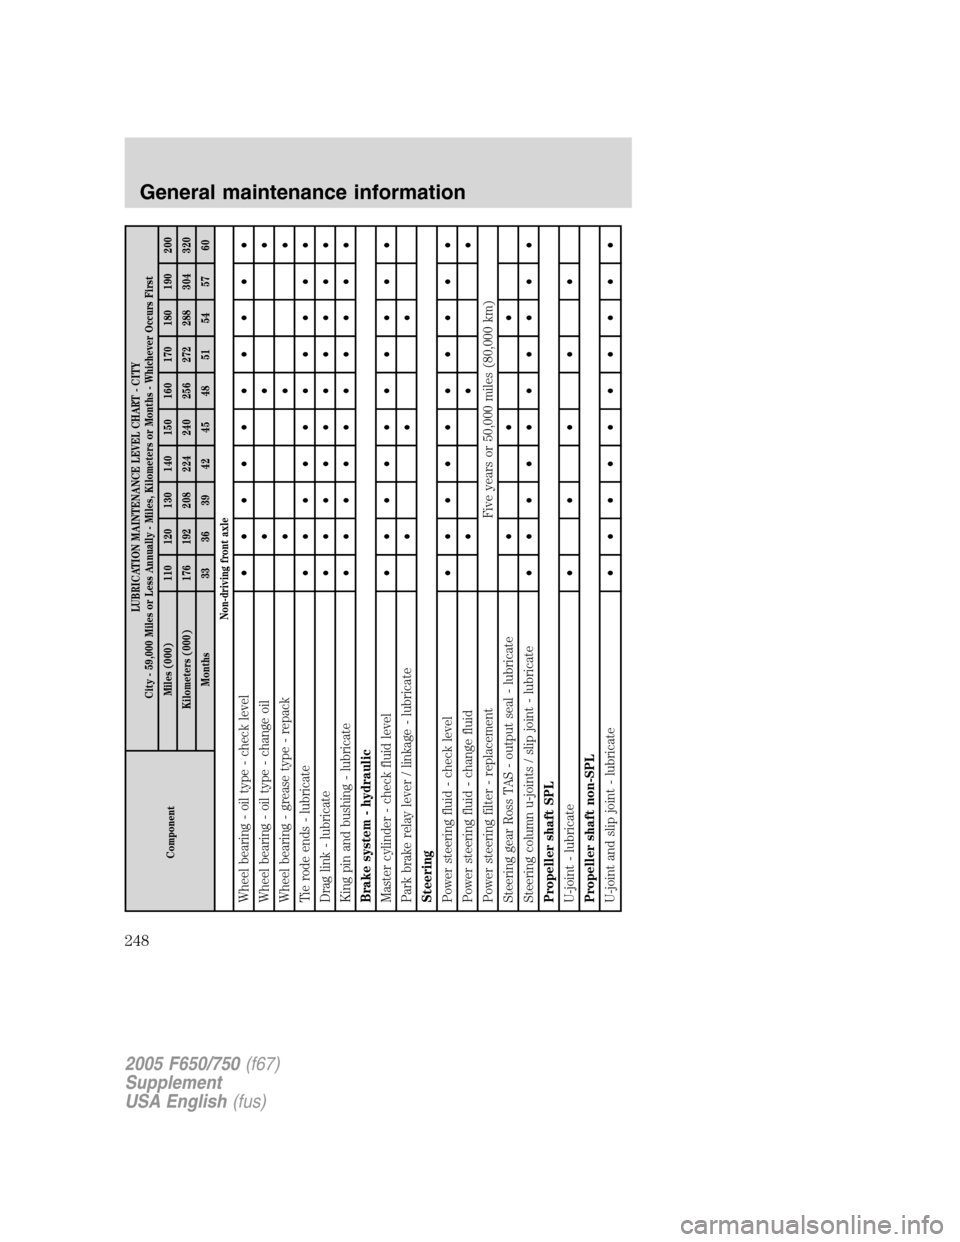 FORD F750 2005 11.G Owners Manual ComponentLUBRICATION MAINTENANCE LEVEL CHART - CITY
City - 59,000 Miles or Less Annually - Miles, Kilometers or Months - Whichever Occurs First
Miles (000) 110 120 130 140 150 160 170 180 190 200
Kilo